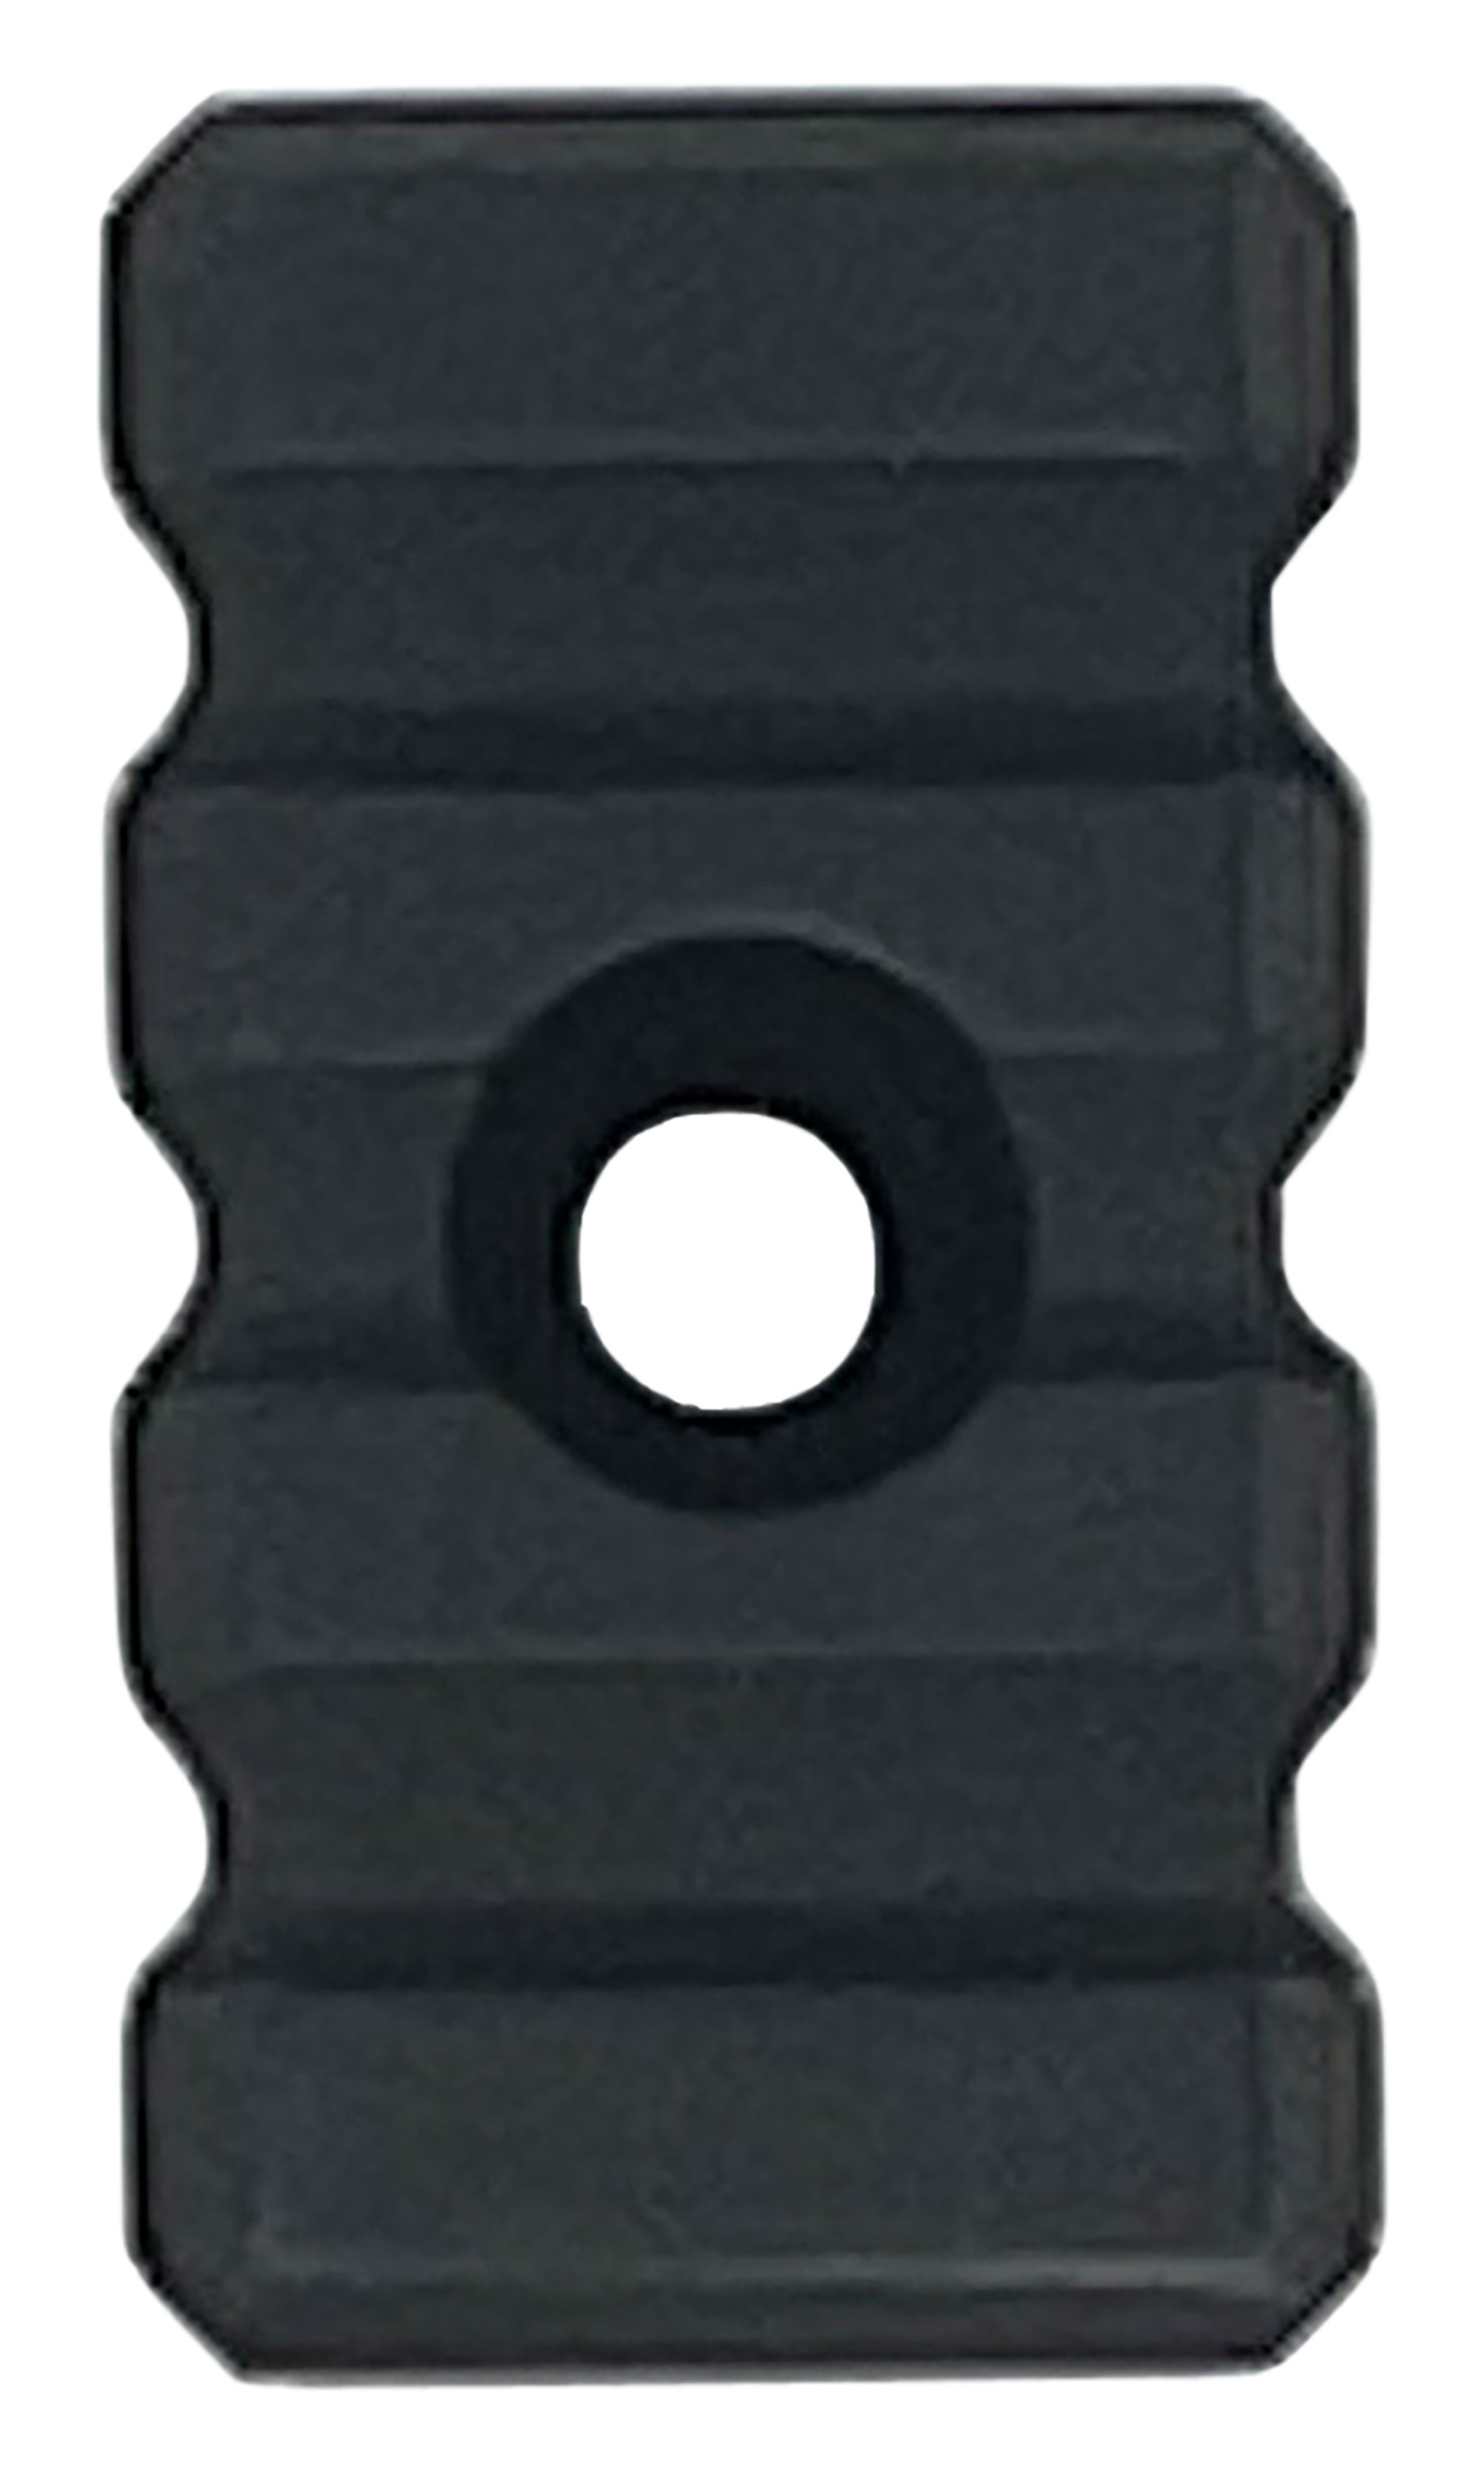 Bowden Tactical J1311542 AR*Chitect Picatinny Rail made of Aluminum with Black Hardcoat Anodized Finish, Short Style & M-LOK Mount Type for AR-15